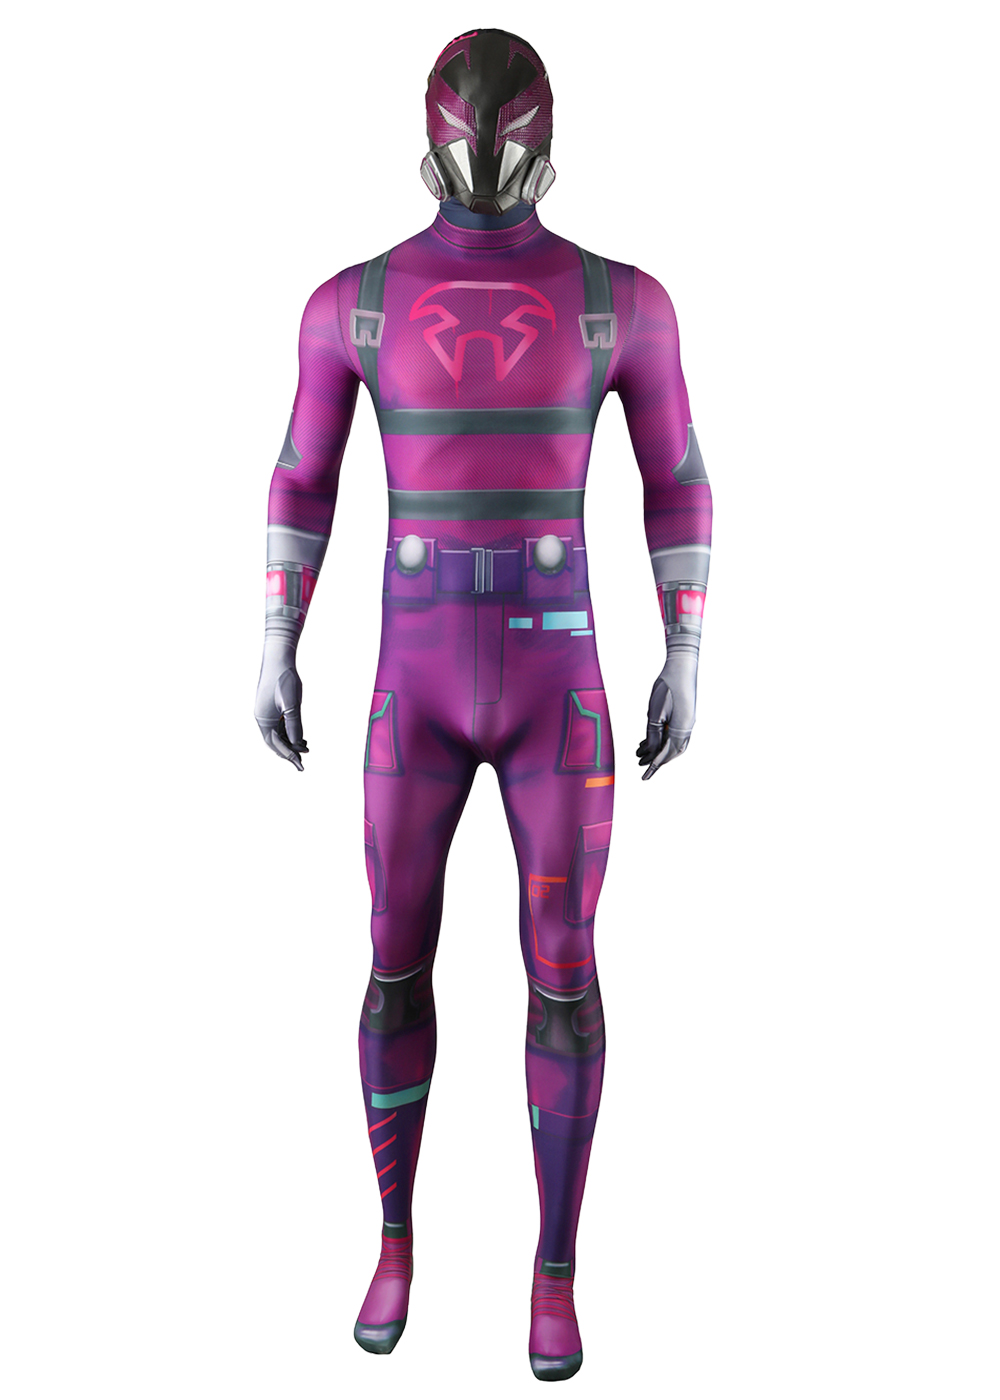 Prowler Costume Spider-Man: Into the Spider-Verse Bodysuit Cosplay for Adult Kids